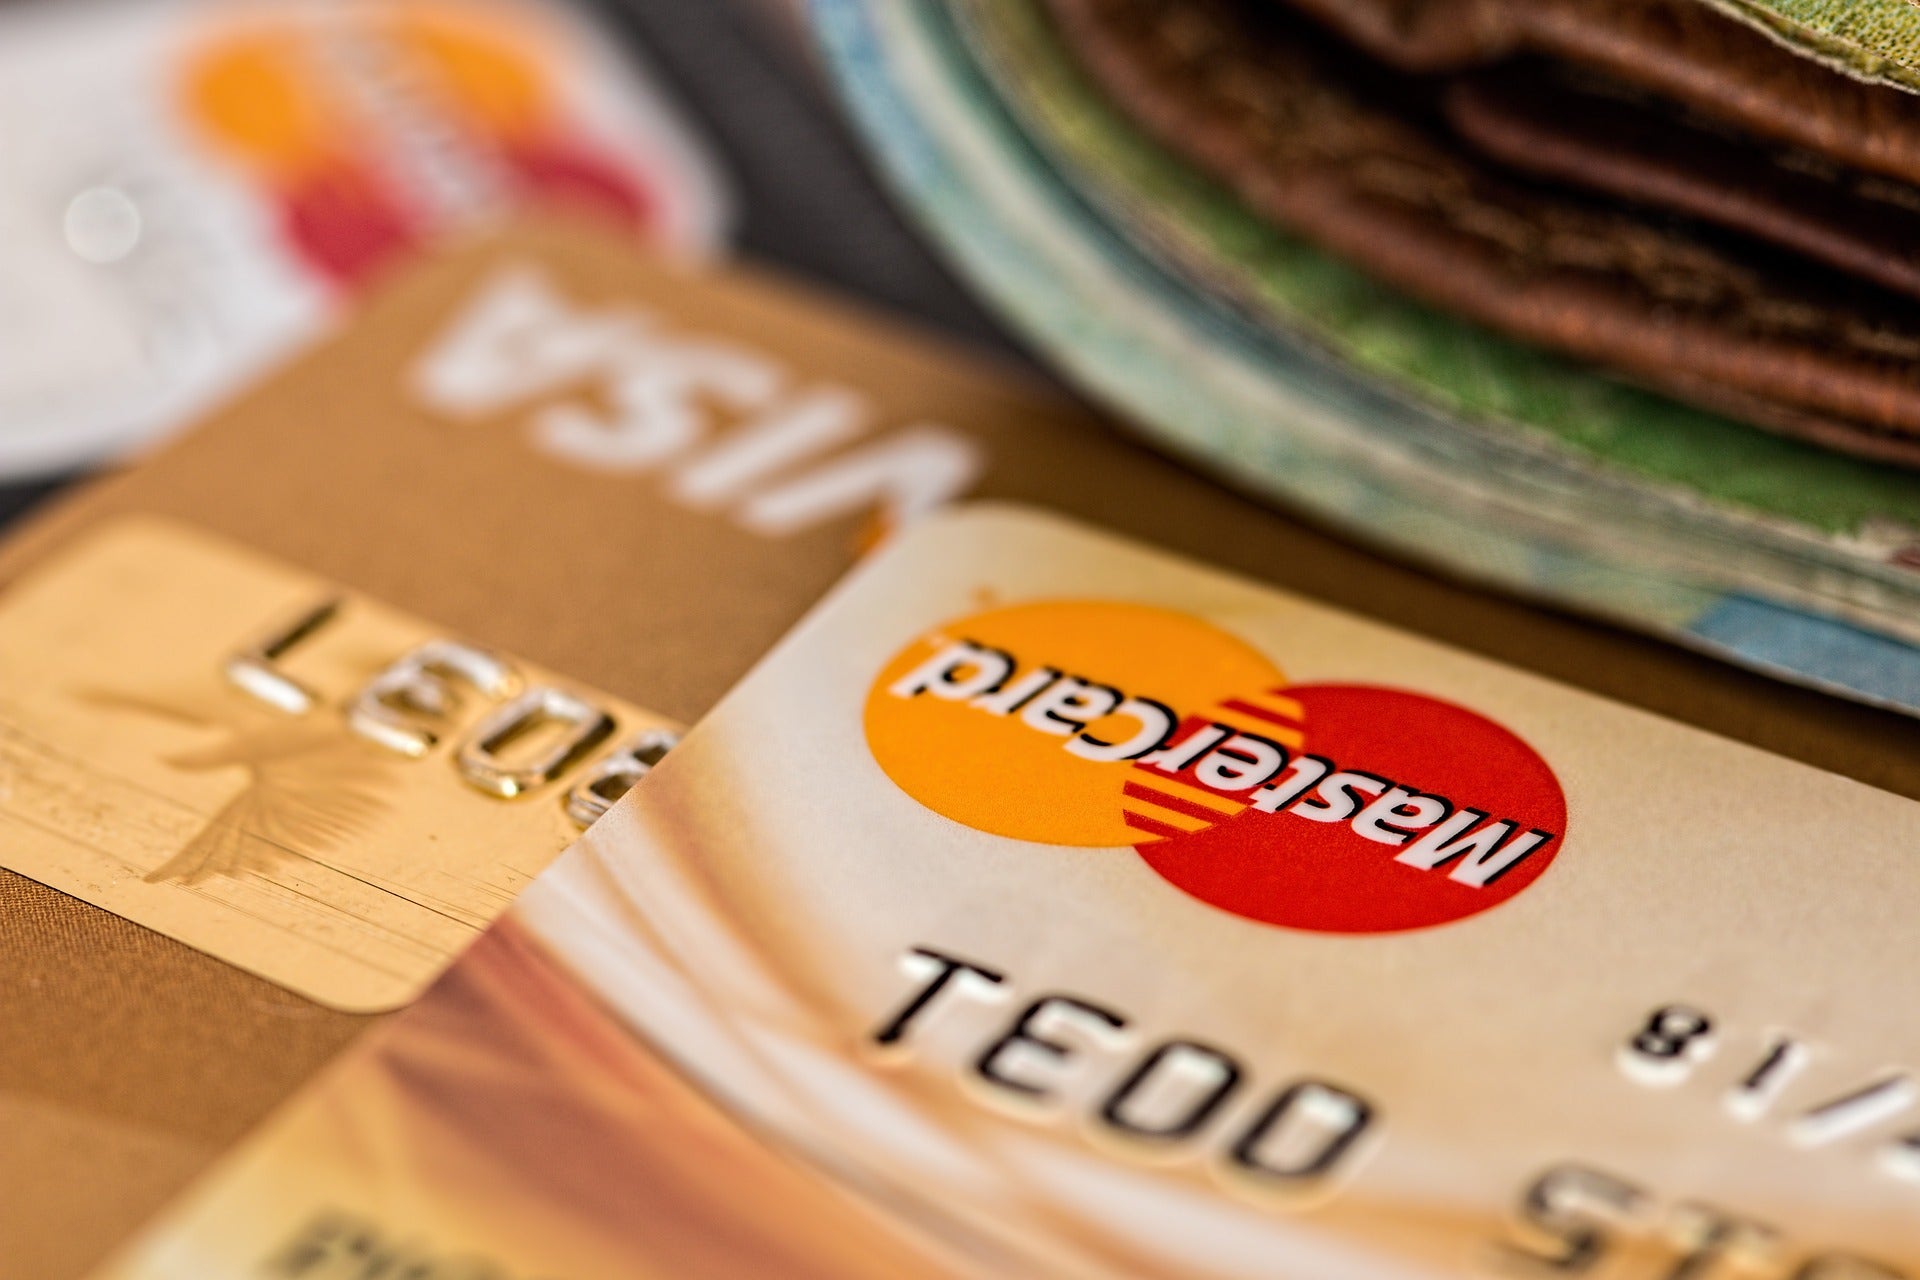 Mizuho Slashes Price Targets Of Mastercard, Visa Out Of Precaution - Read Why